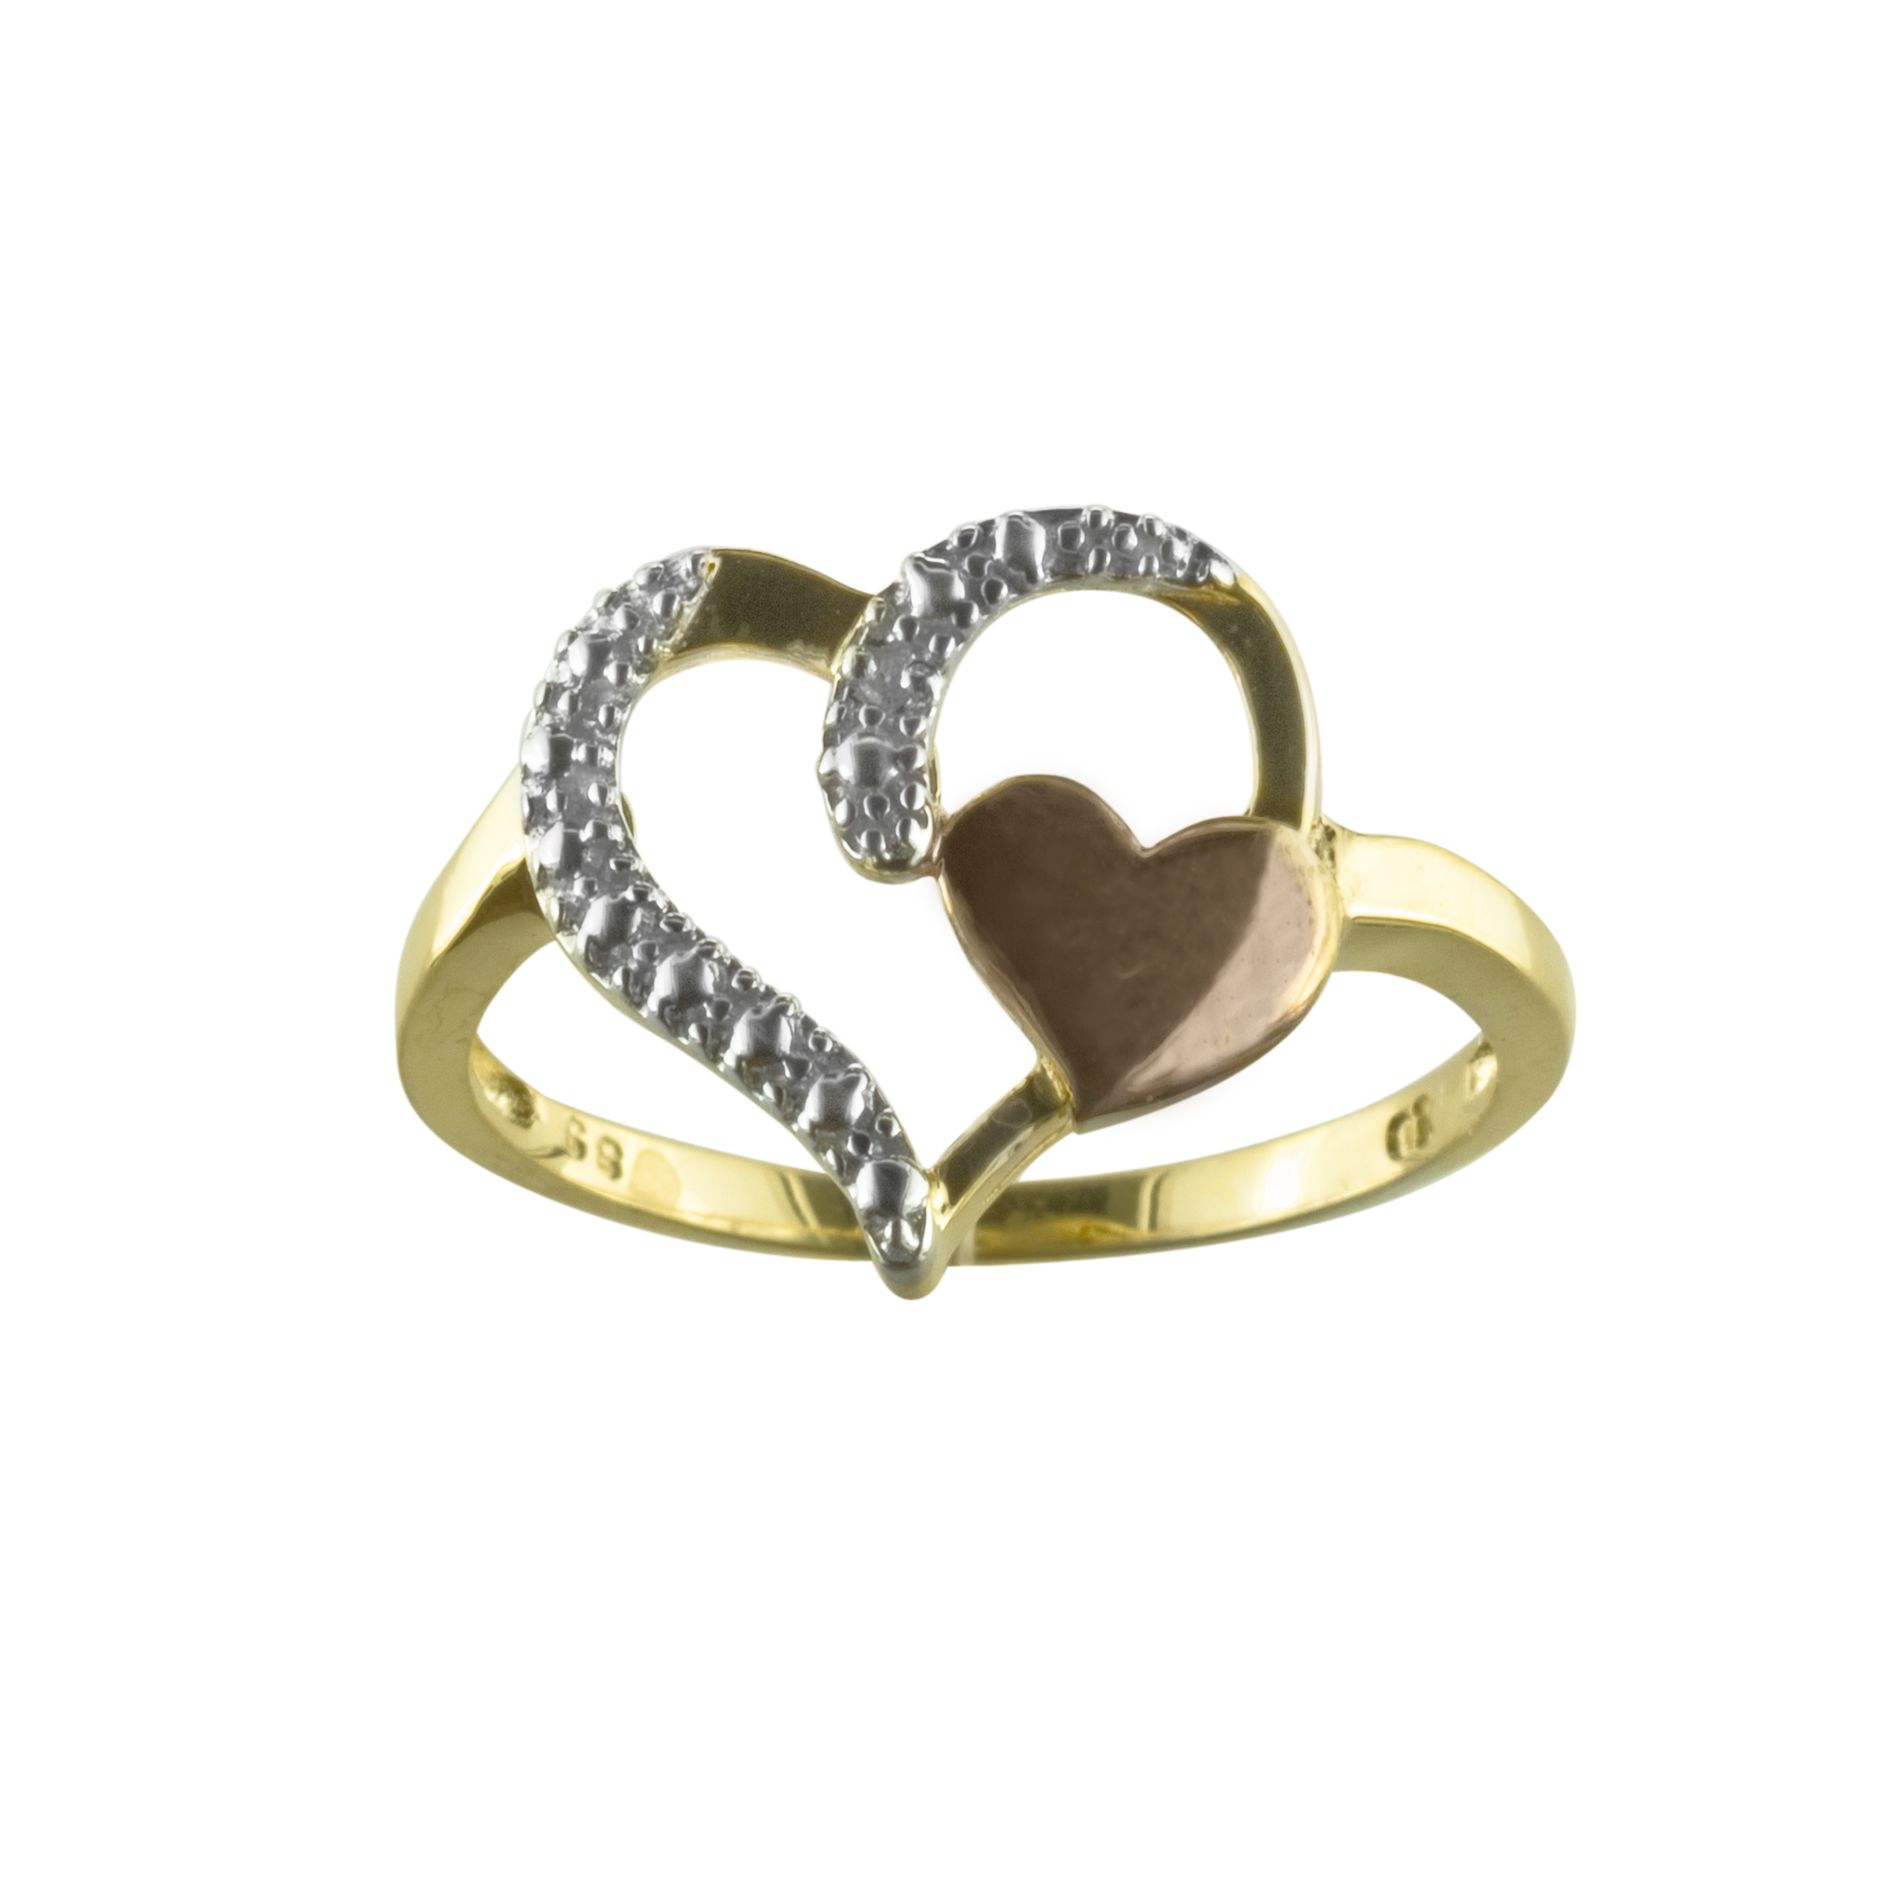 Diamond Accent Heart Ring in 18k Gold over Sterling Silver